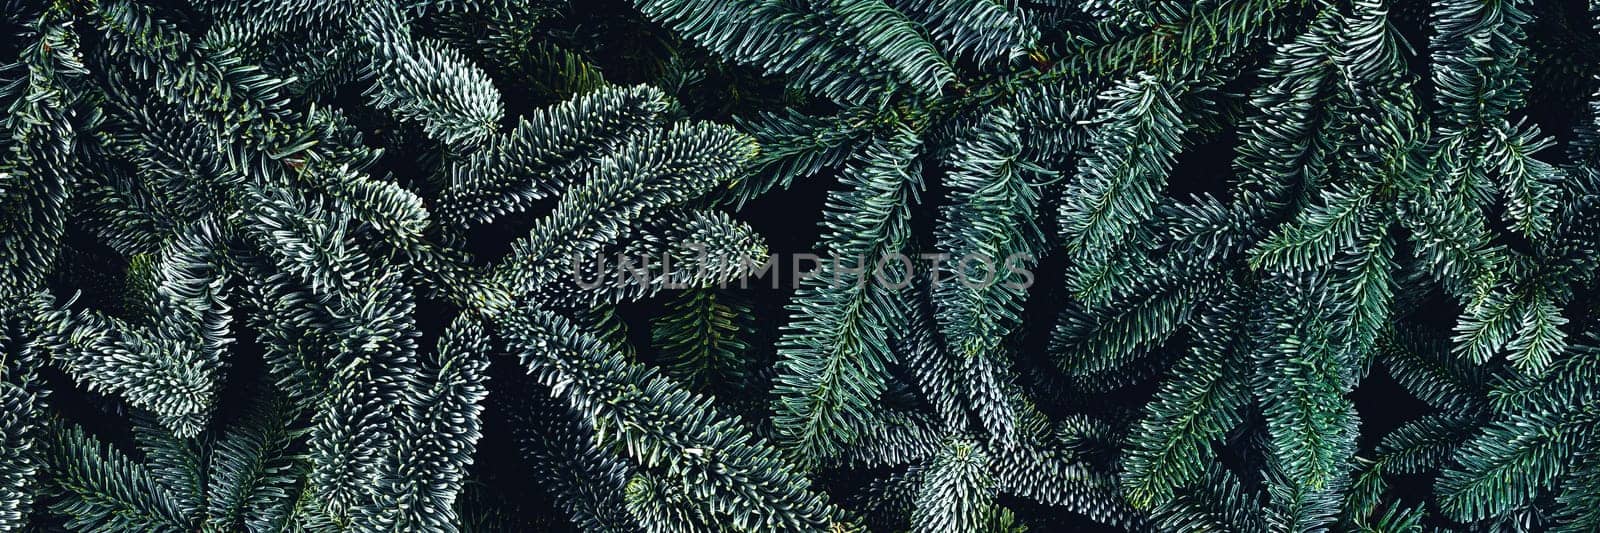 Christmas concept. Background with green fir branches. Dark photo. Flat lay, top view, copy space.